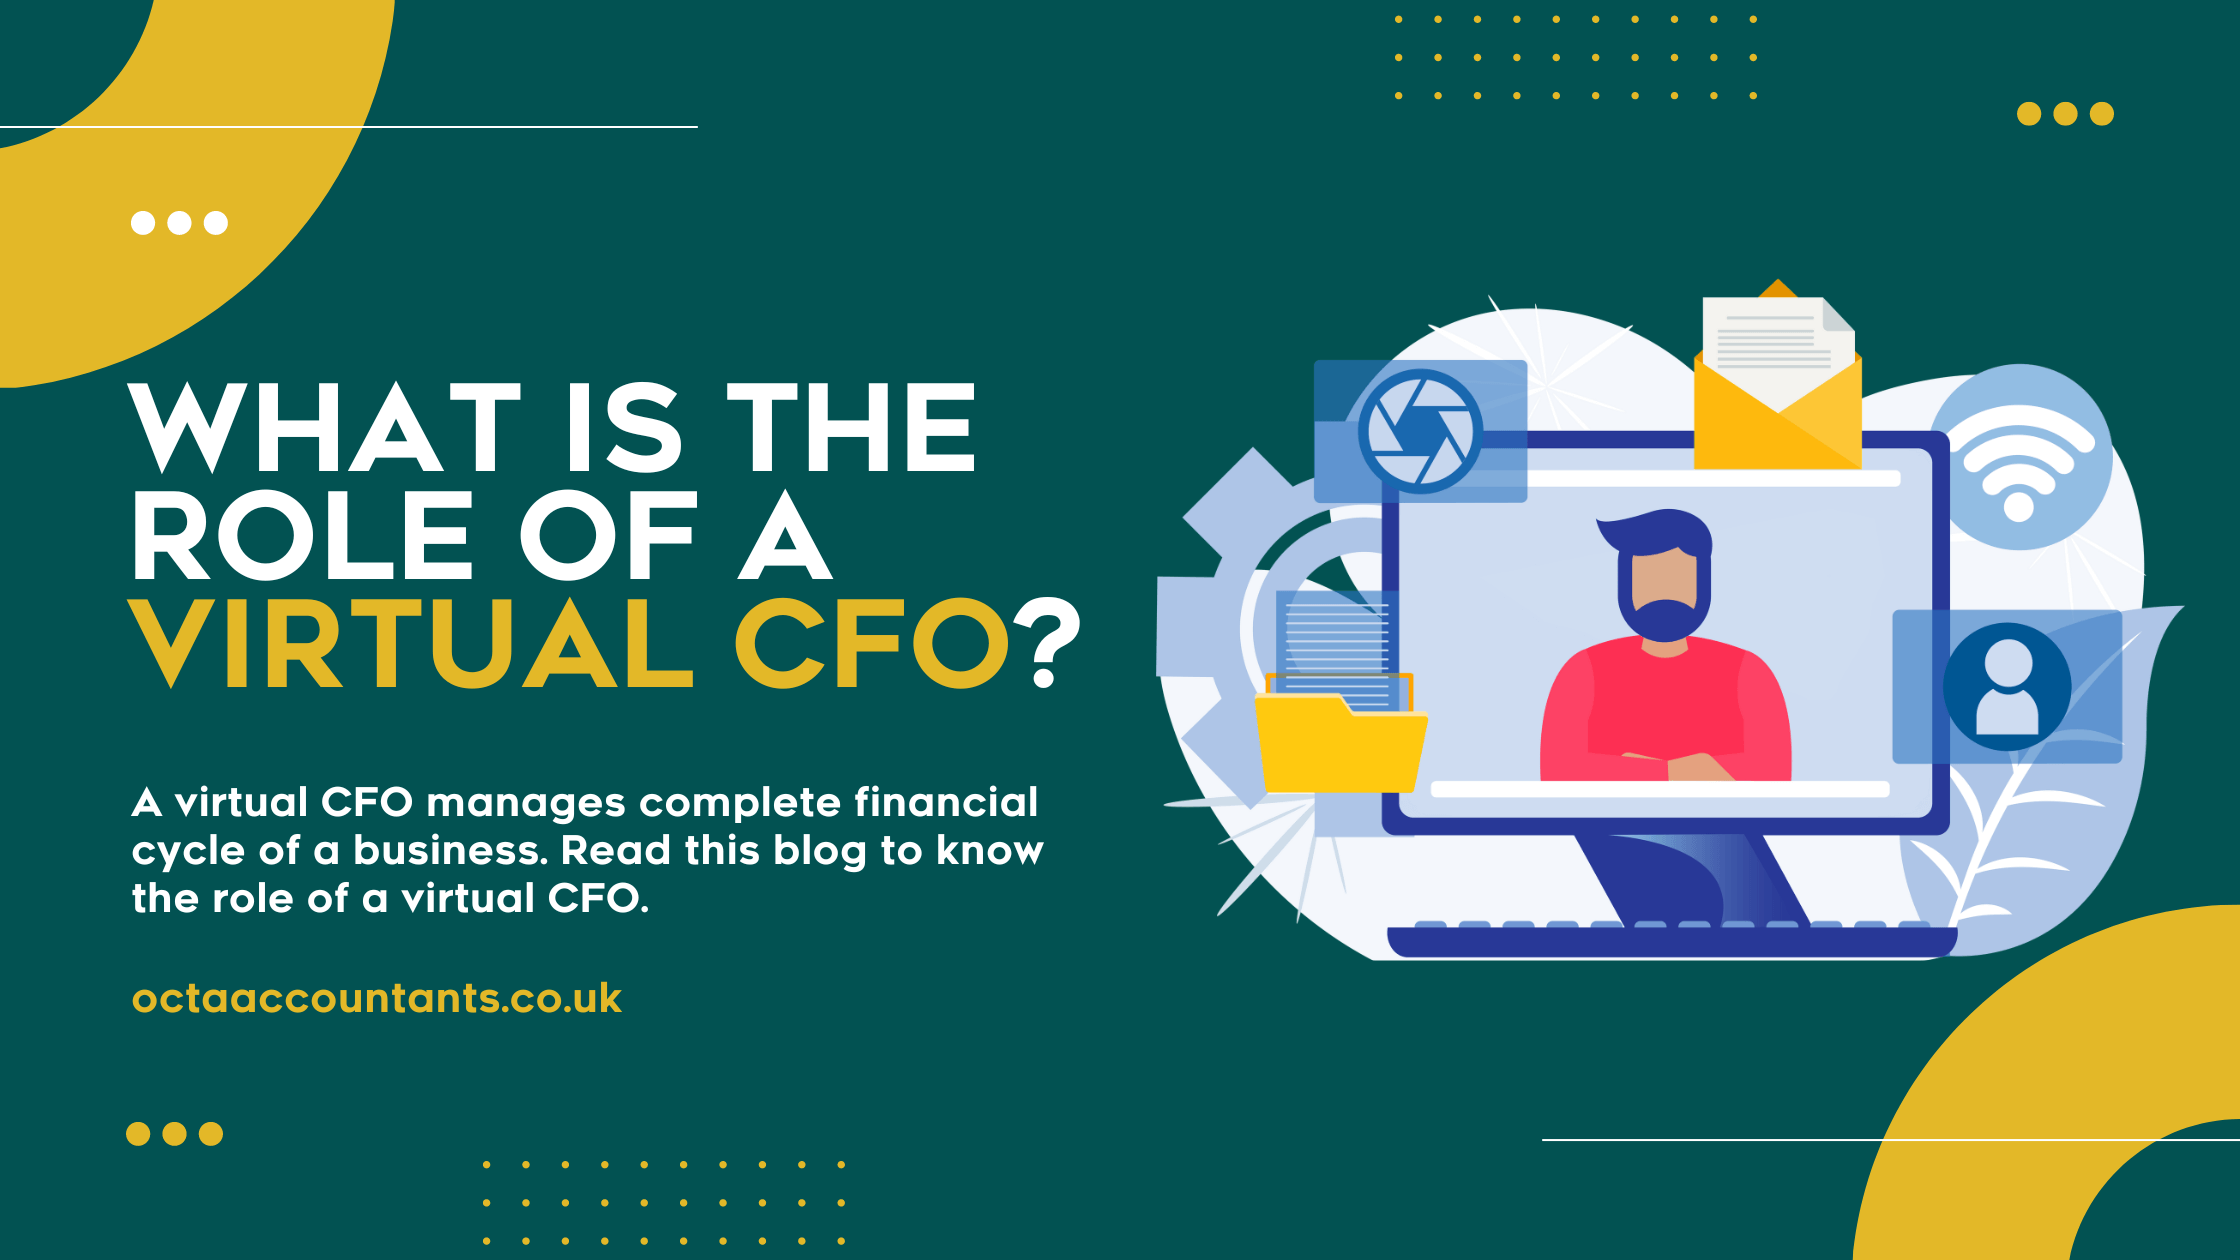 What is the role of a virtual CFO